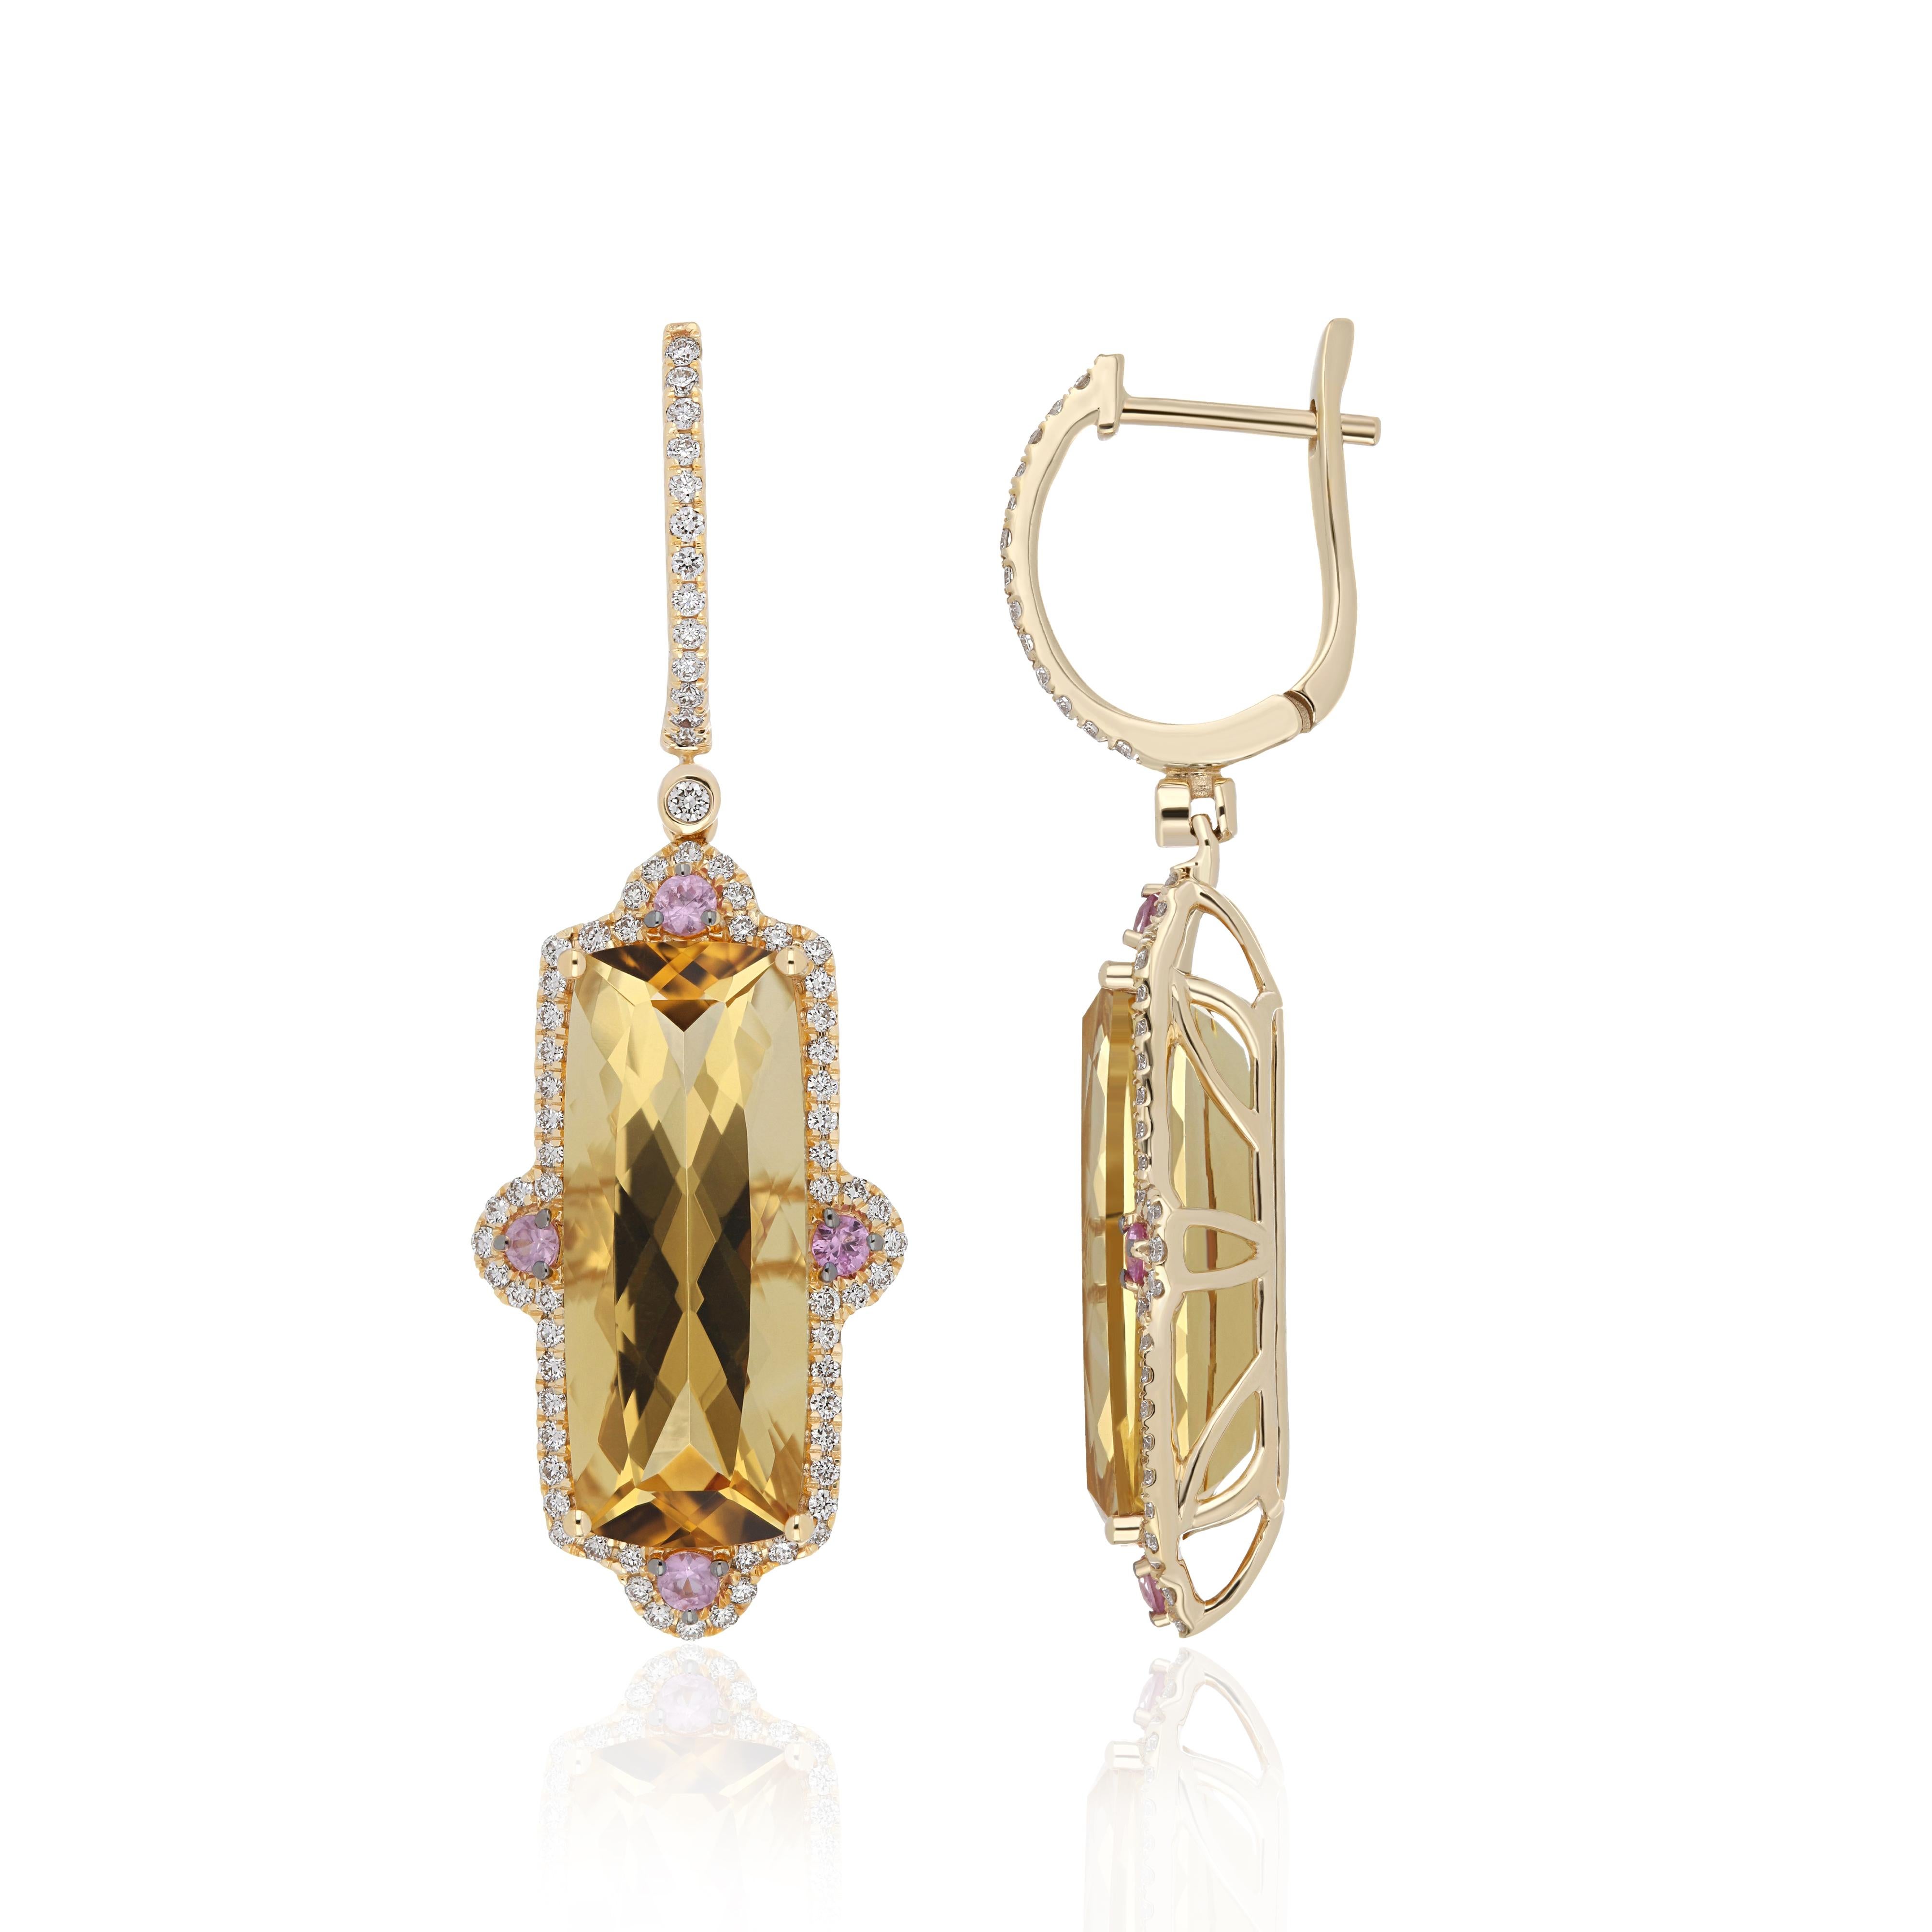 Elegant and Exquisitely detailed cocktail Pendant , Centre Set with vibrant Cushion Shape Citrine Weighing approx. 13.9 Cts accented intense Pink Sapphire and Micro Pave Set Diamonds weighing approx. 0.67 Cts, Beautifully Hand Crafted in 14 Karat